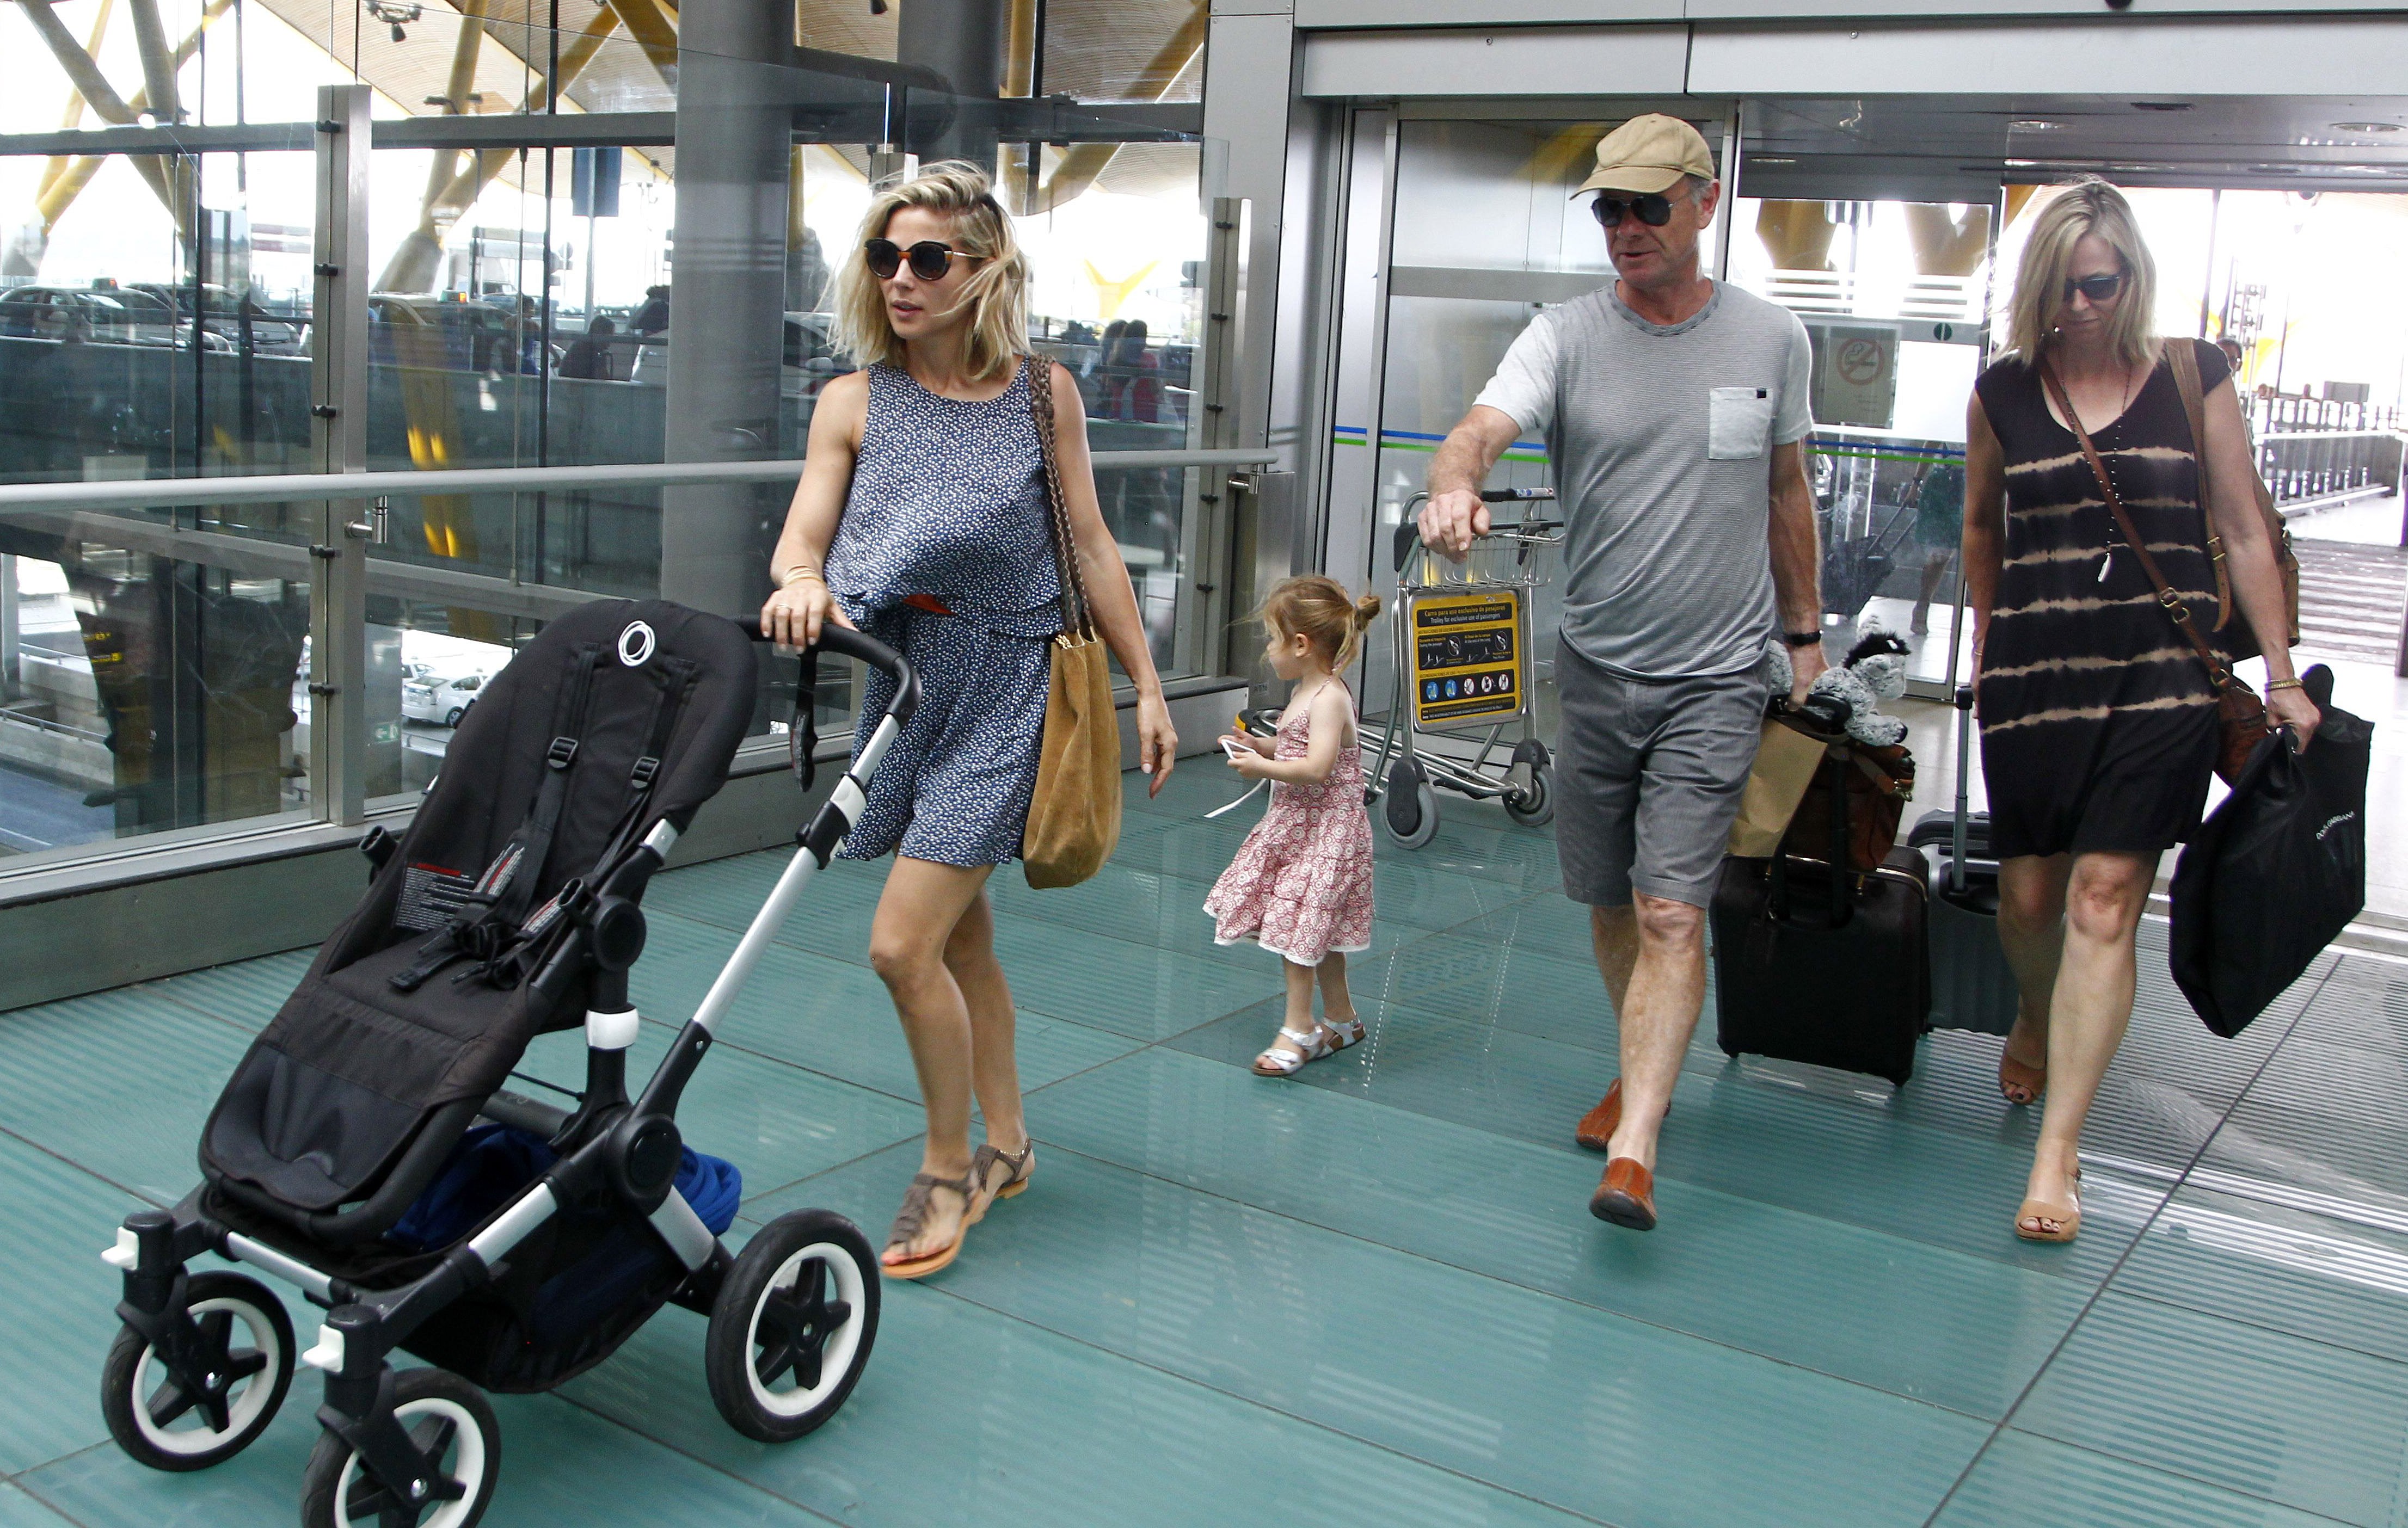  Elsa Pataky (L), her daughter Indian Rose Hemsworth, her father-in-law Craig Hemsworth and her mother-in-law Leonie Hemsworth (R) are seen on July 7, 2015 in Madrid, Spain. | Source: Getty Images